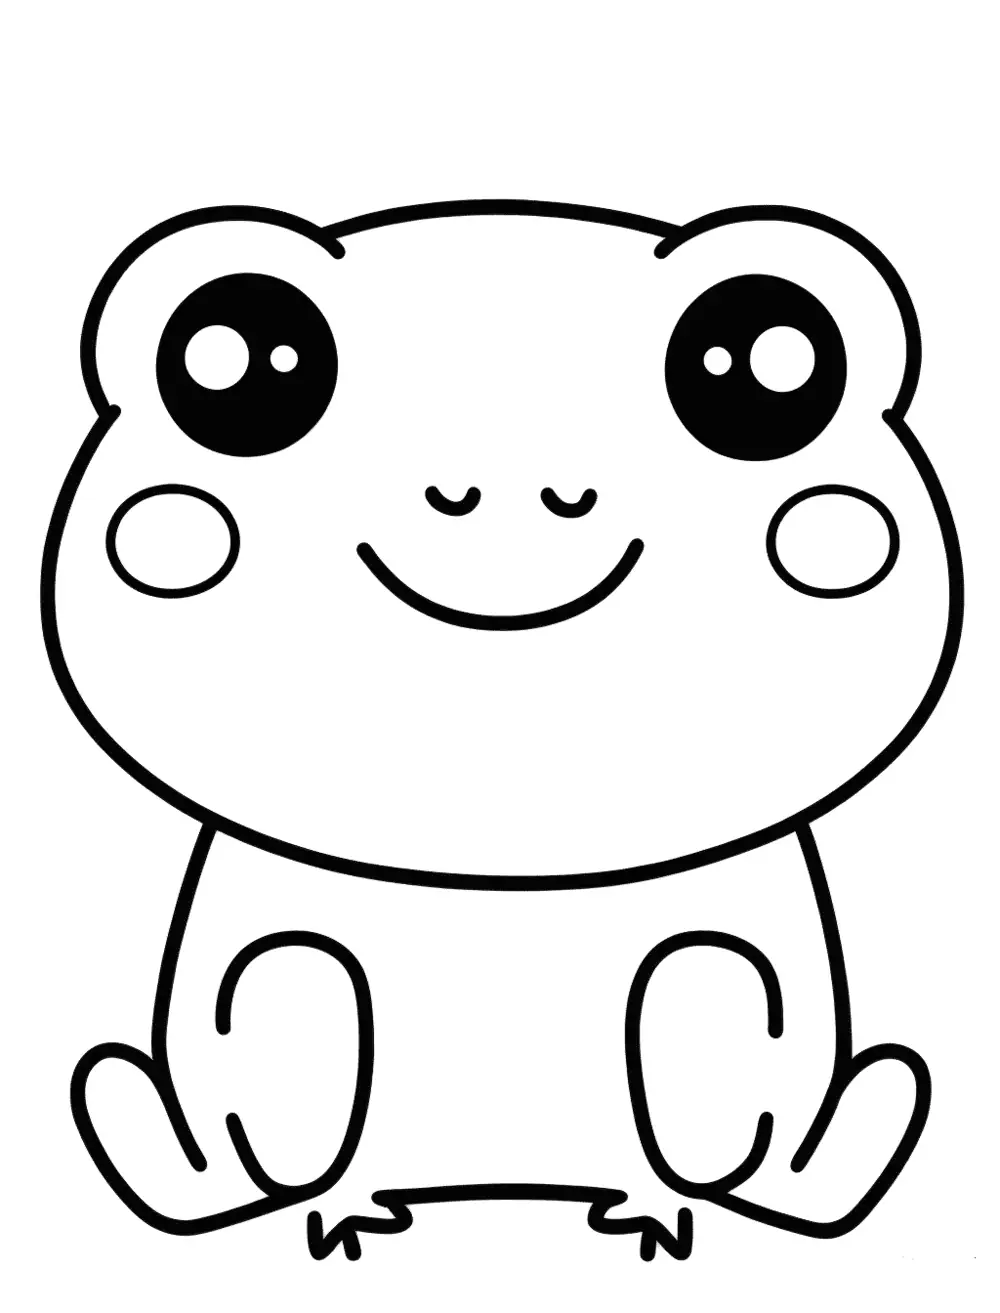 Kawaii Frog Coloring Page - A cute, chubby frog with a big smile and big eyes